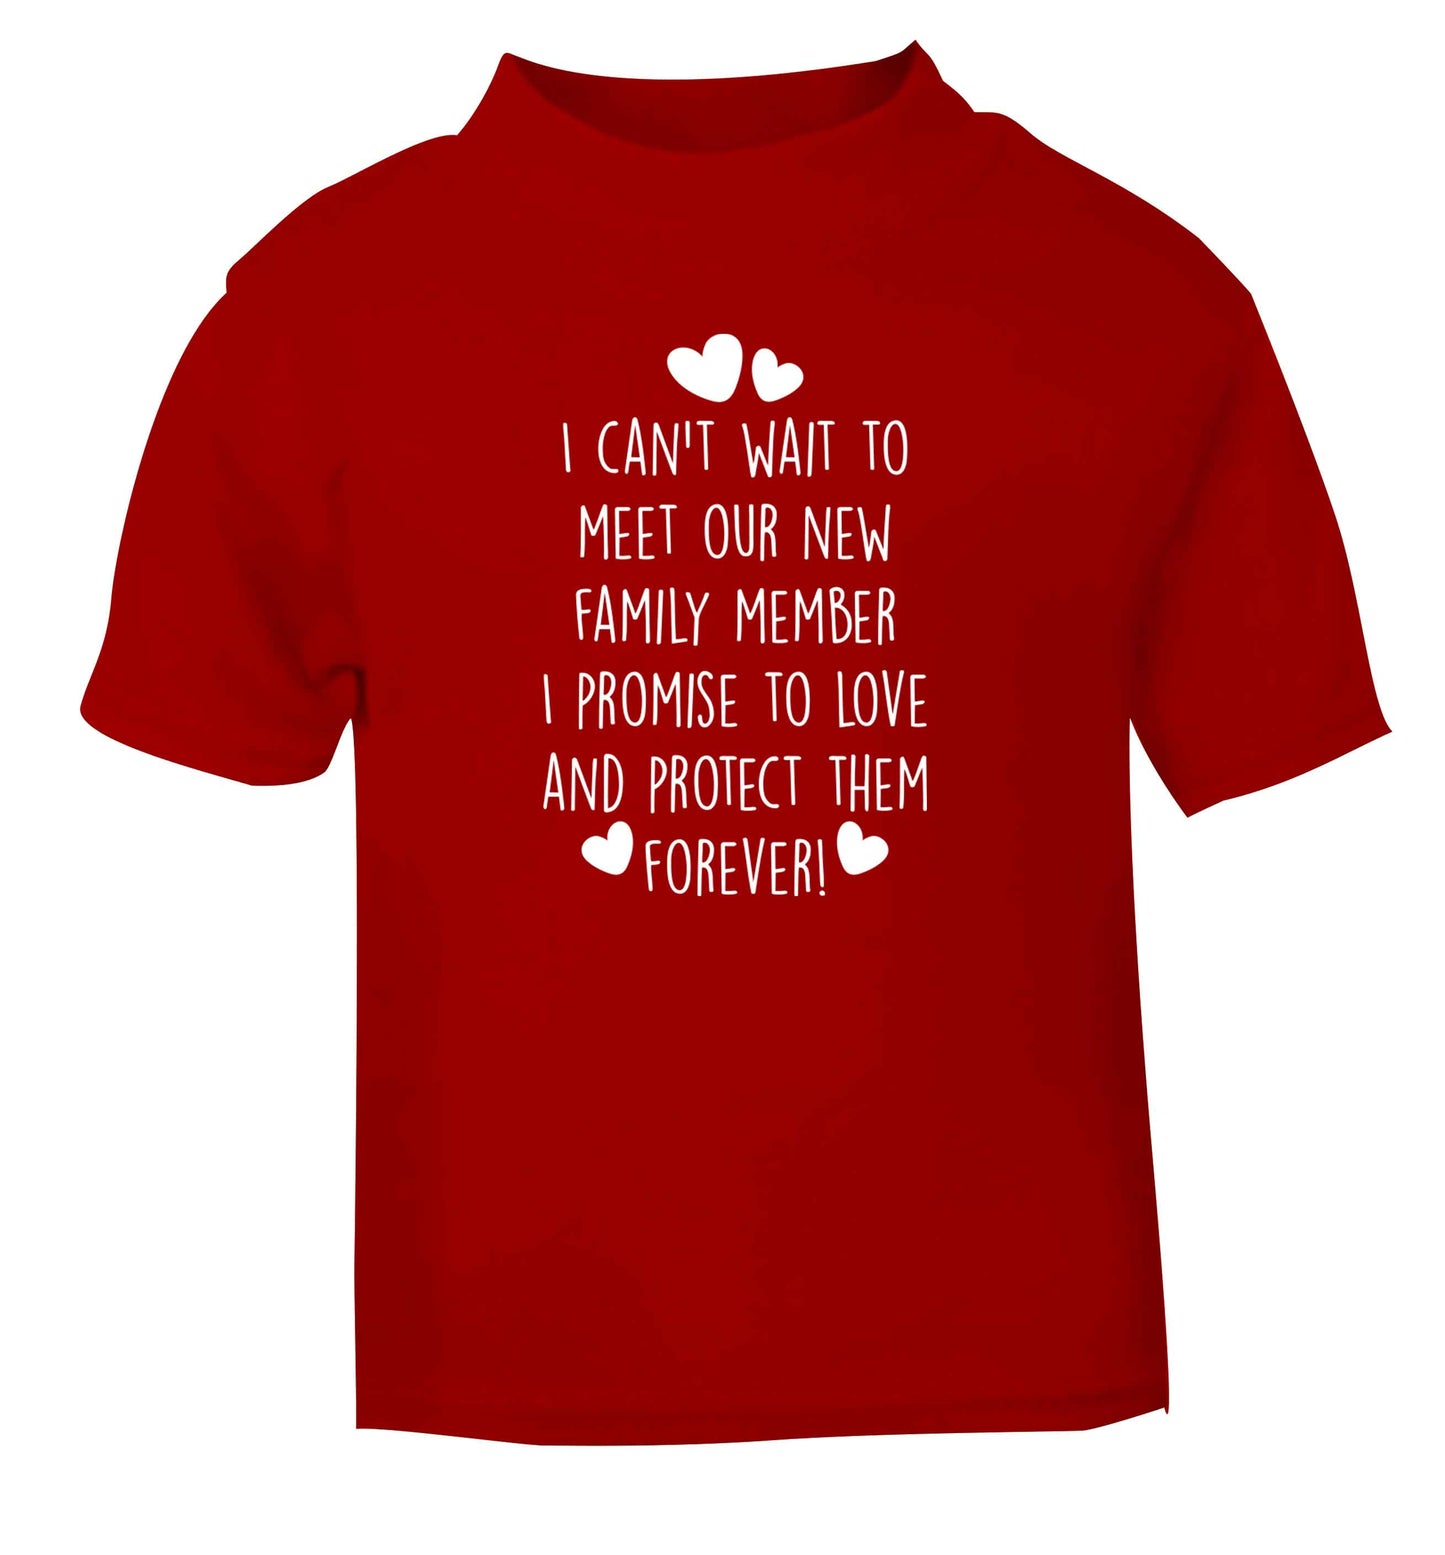 I can't wait to meet our new family member I promise to love and protect them foreverred Baby Toddler Tshirt 2 Years